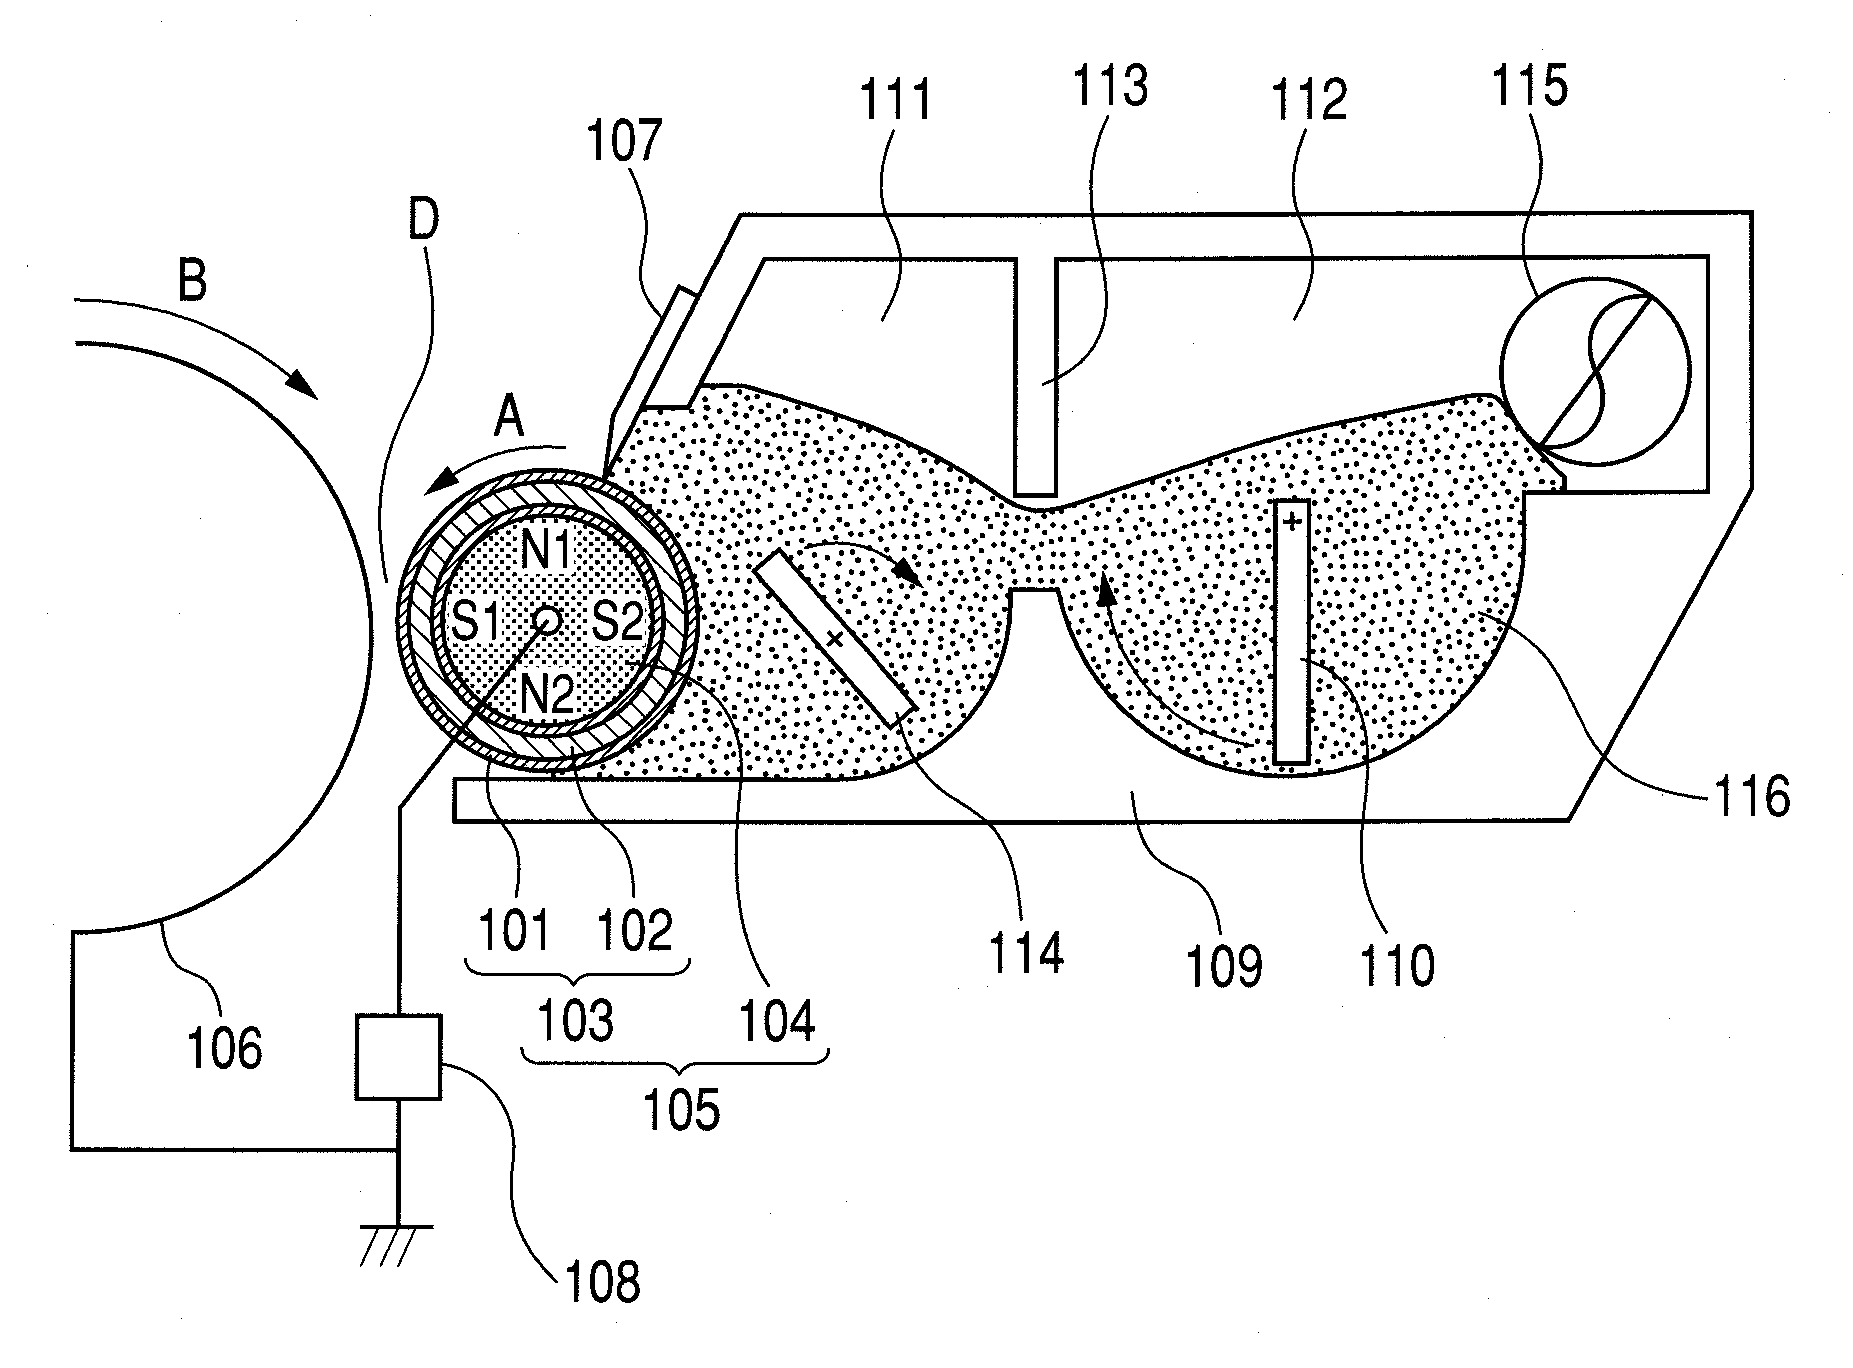 Developing apparatus and electrophotographic image-forming apparatus